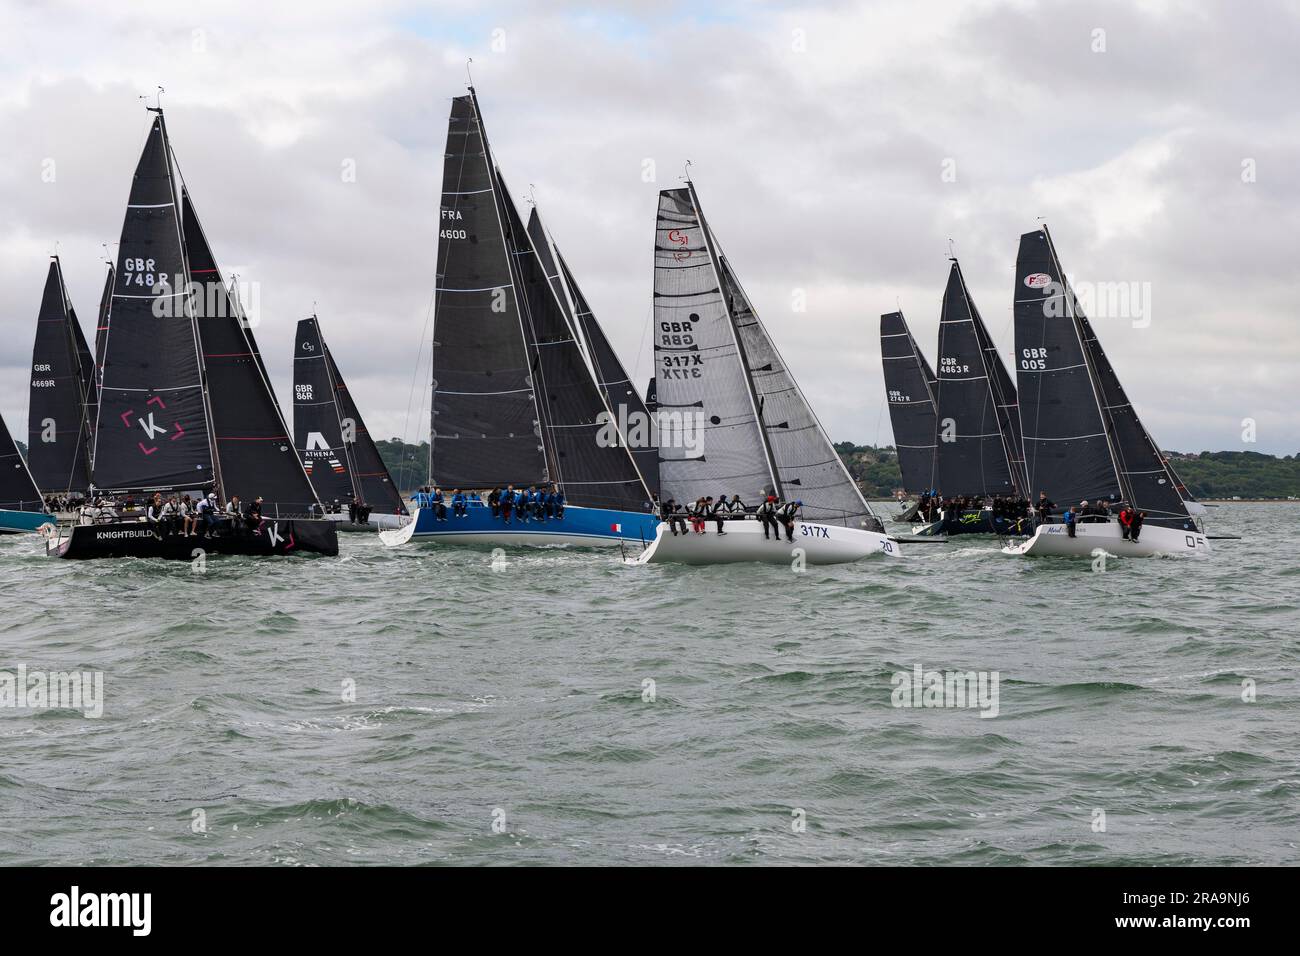 It's an immpressive sight when all the sailboats line up for the start of the Isle of Wight Round The Island Yacht Race Stock Photo